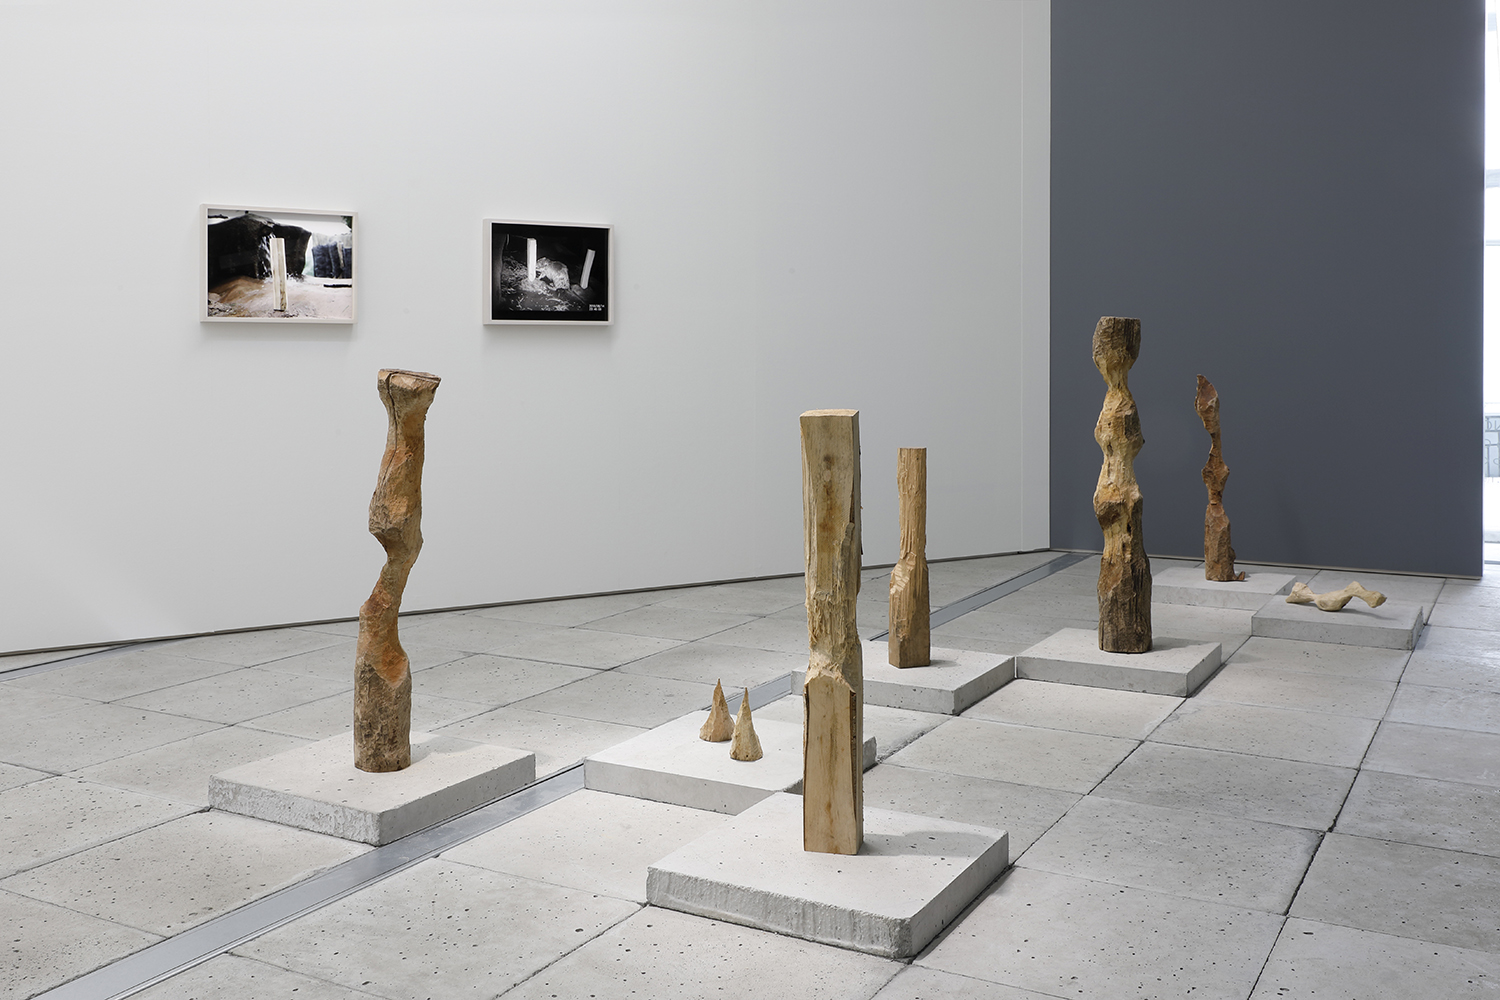 Installation view of “How to Carve a Sculpture”